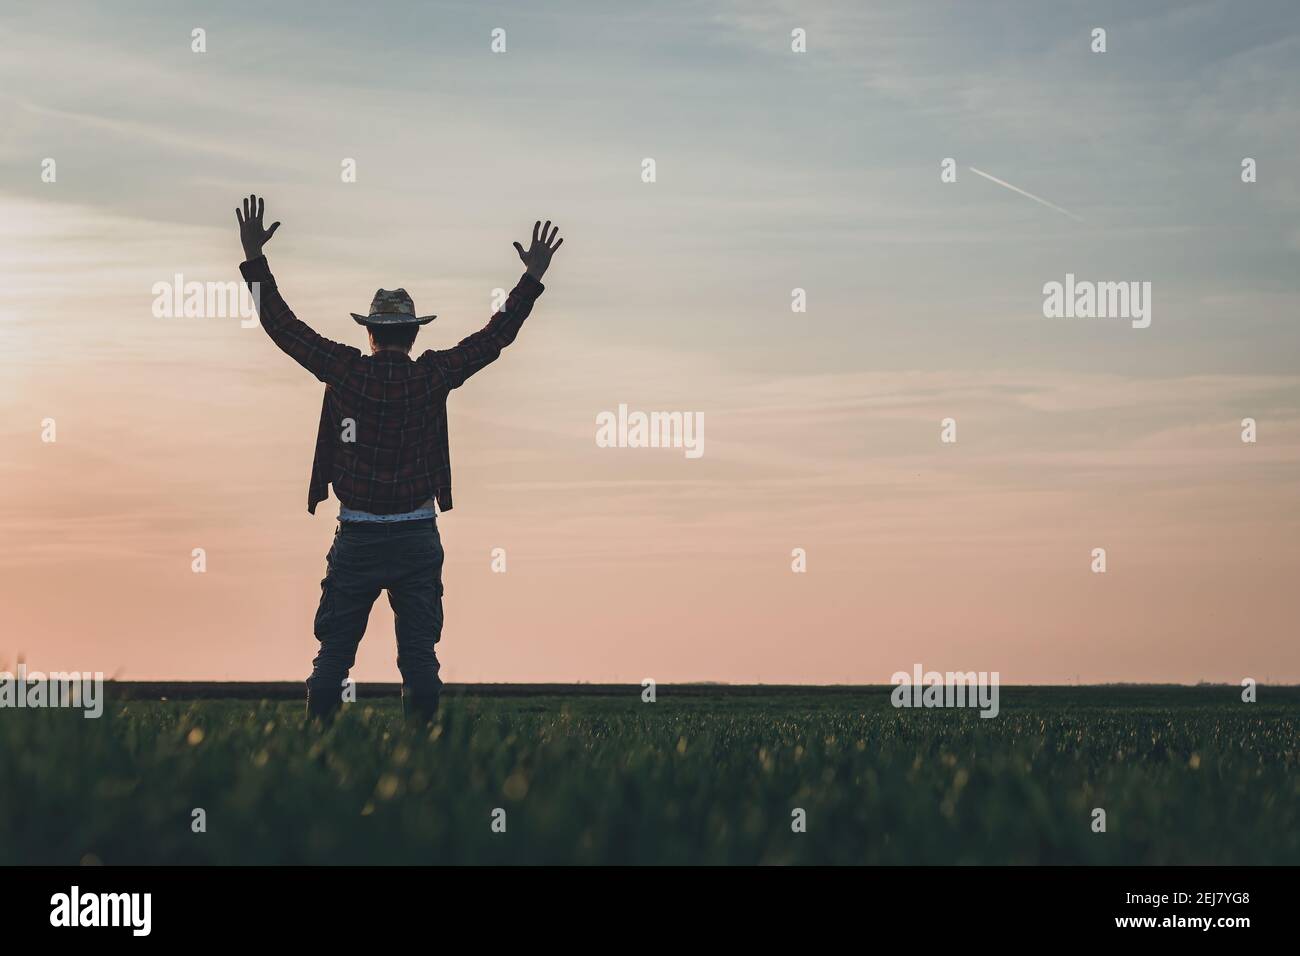 Satisfied farmer in wheatgrass field with hands raised, proud and happy he is celebrating success Stock Photo